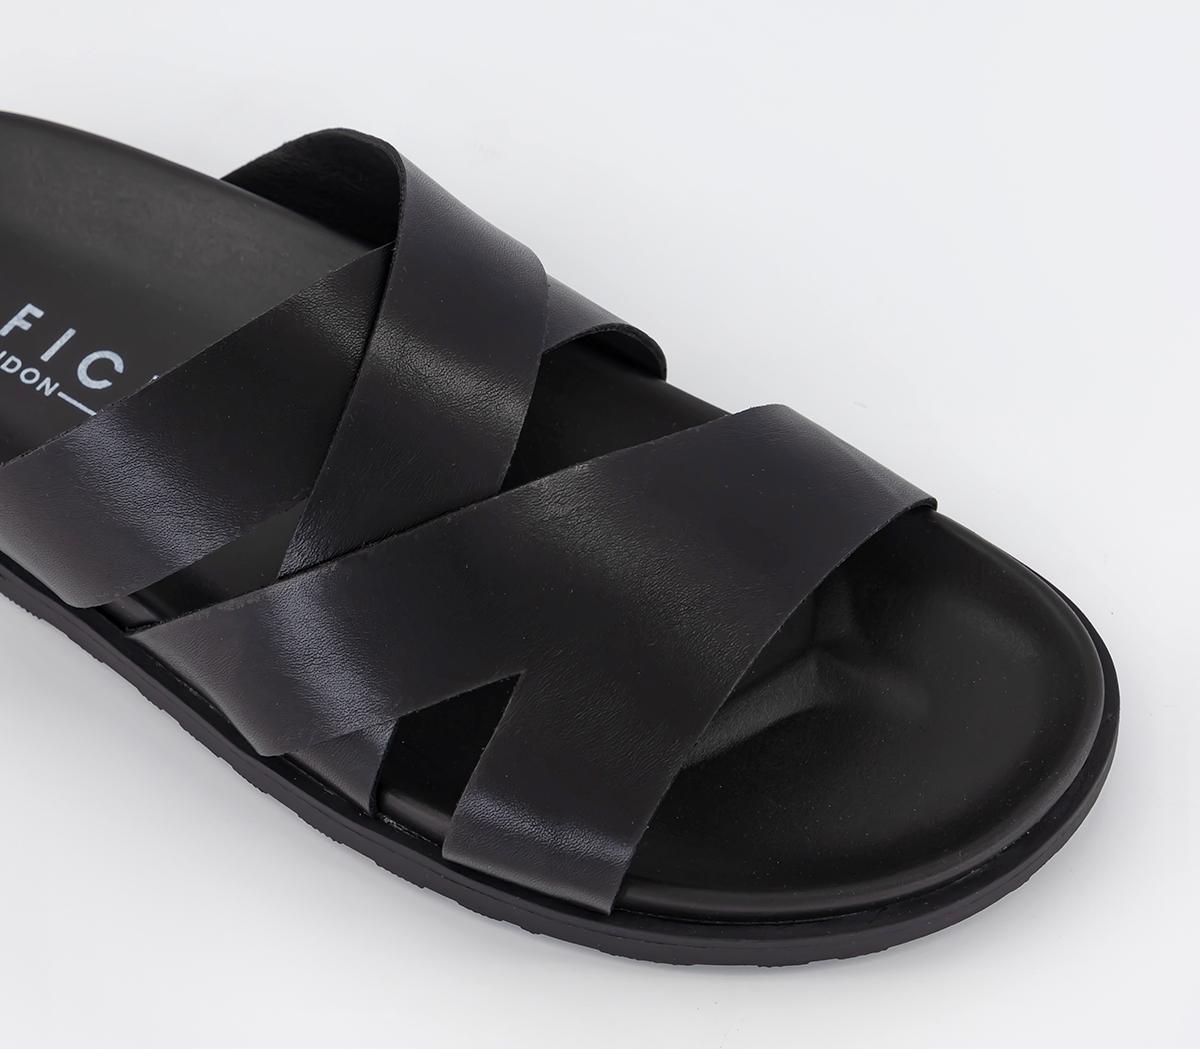 OFFICE Tahiti Multistrap Covered Footbeds Black - Men’s Sandals